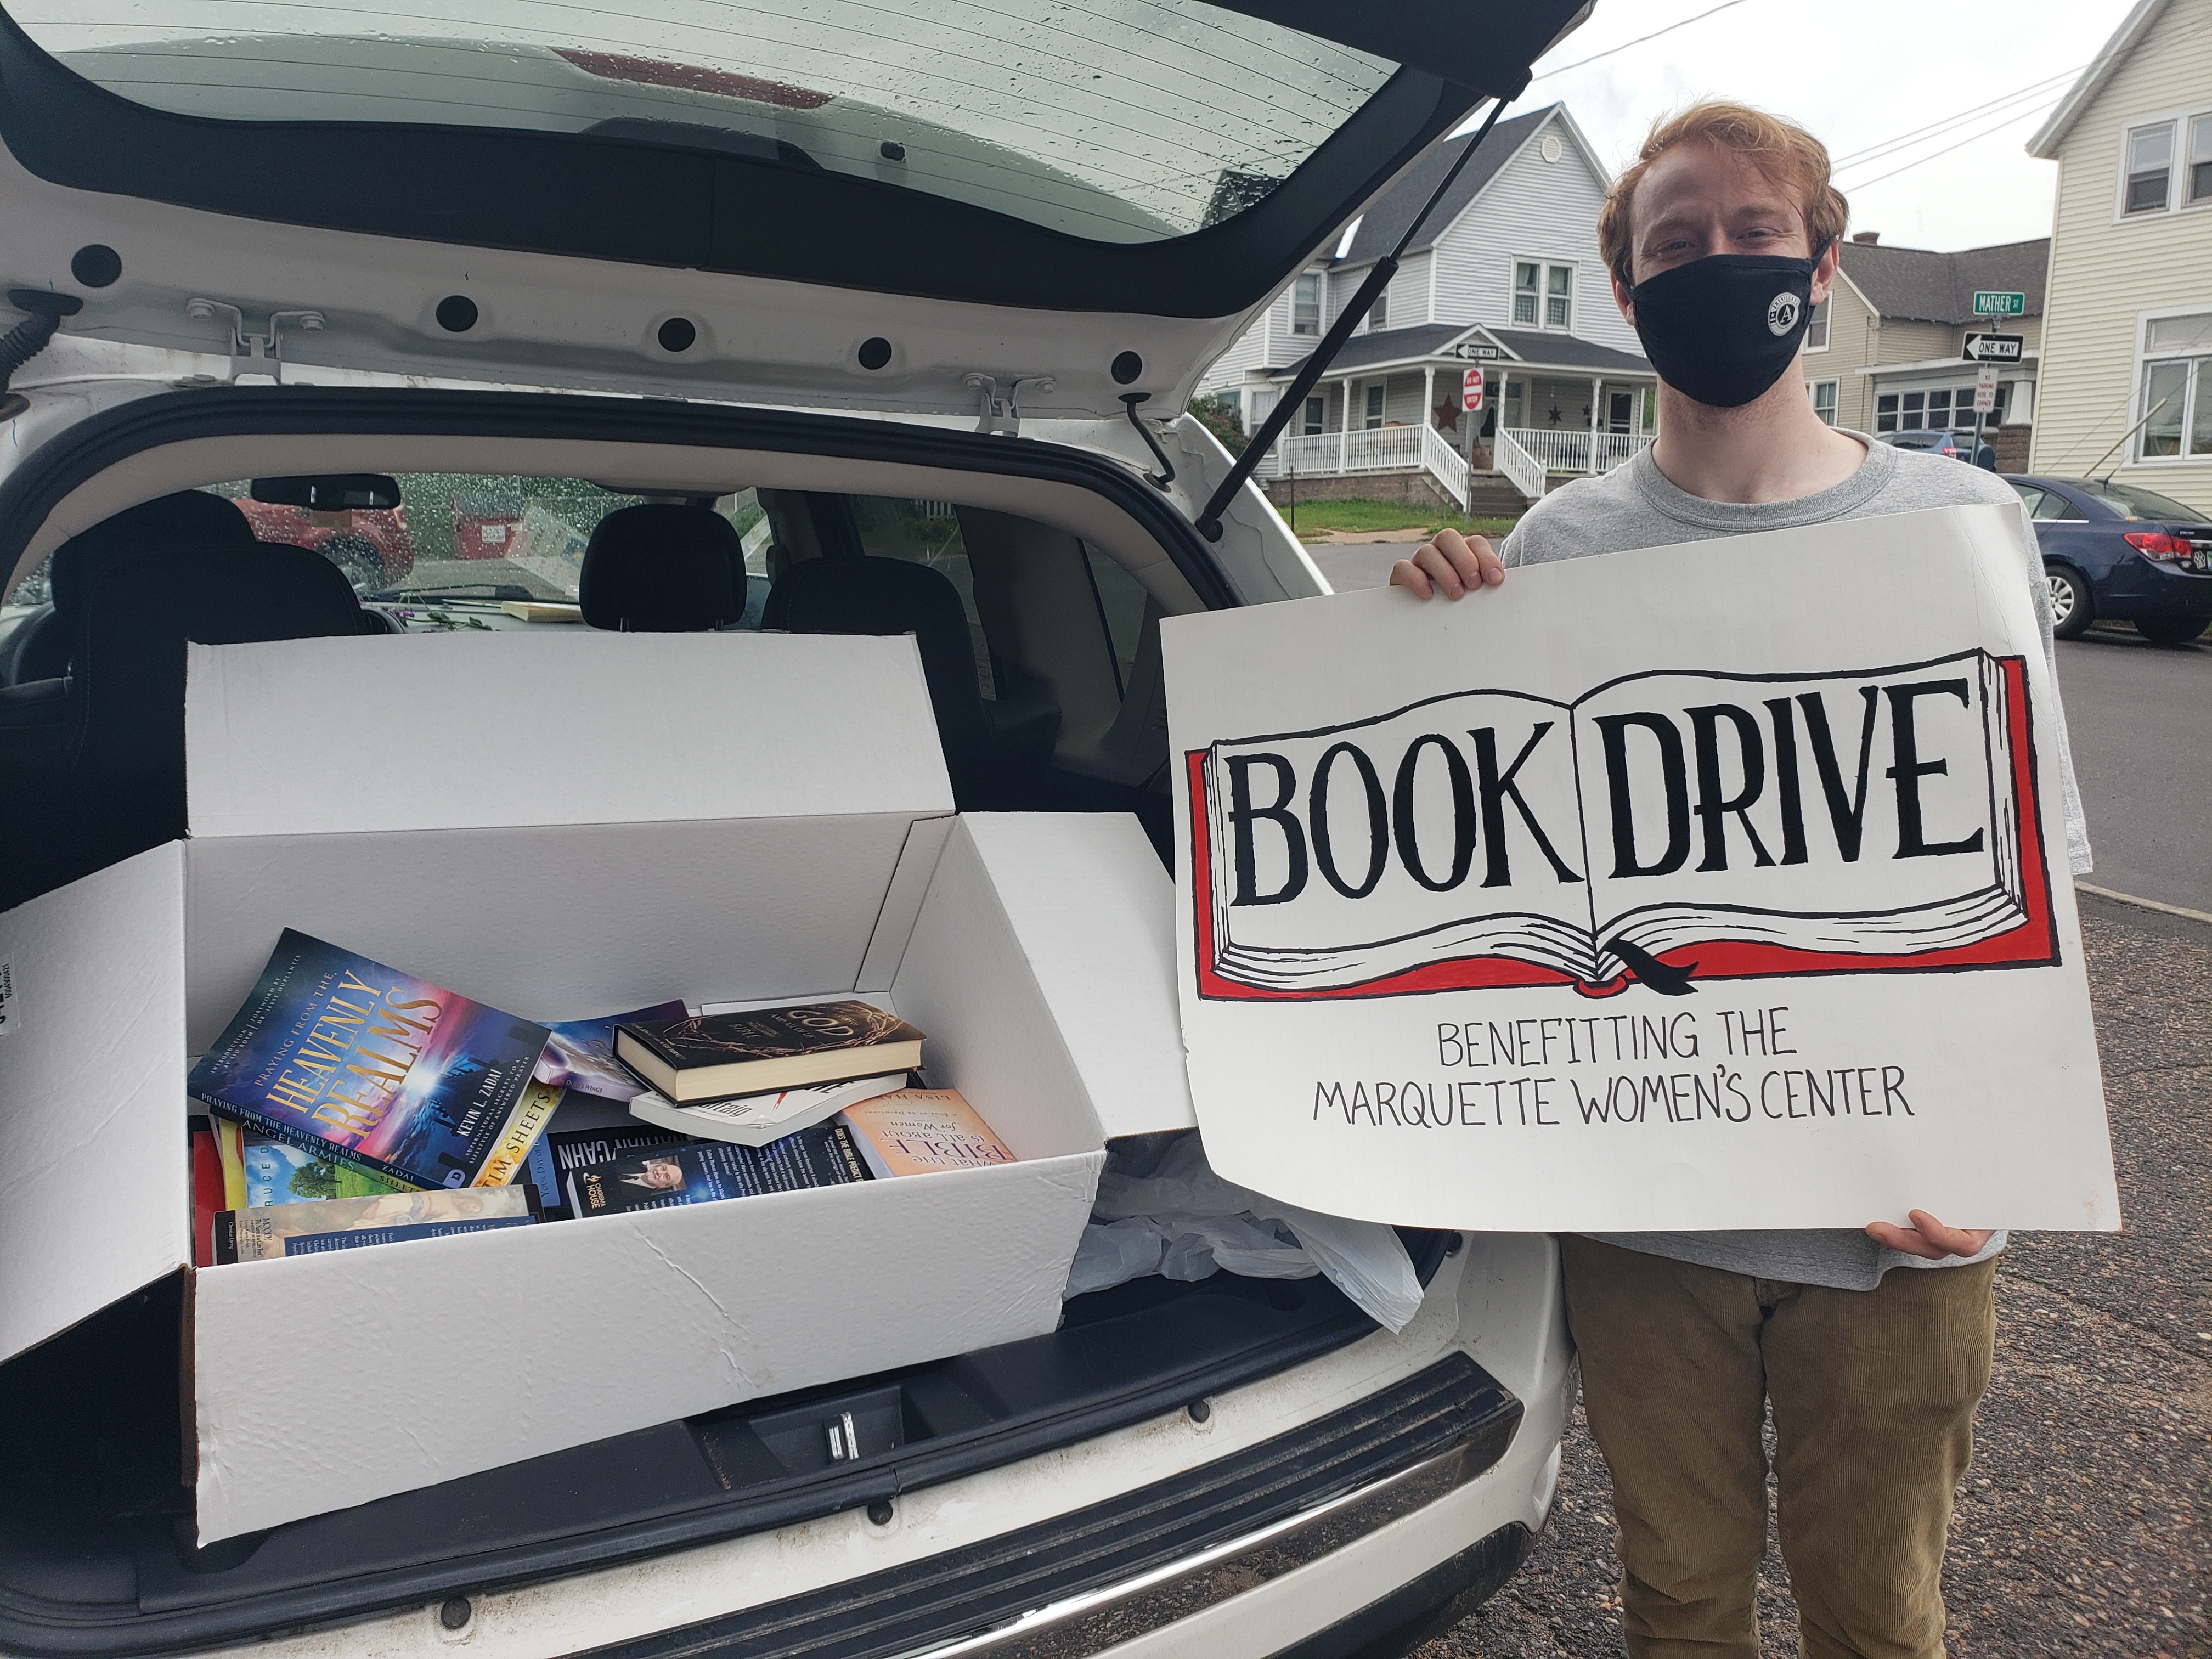 Man poses with a sign that says "Book Drive."